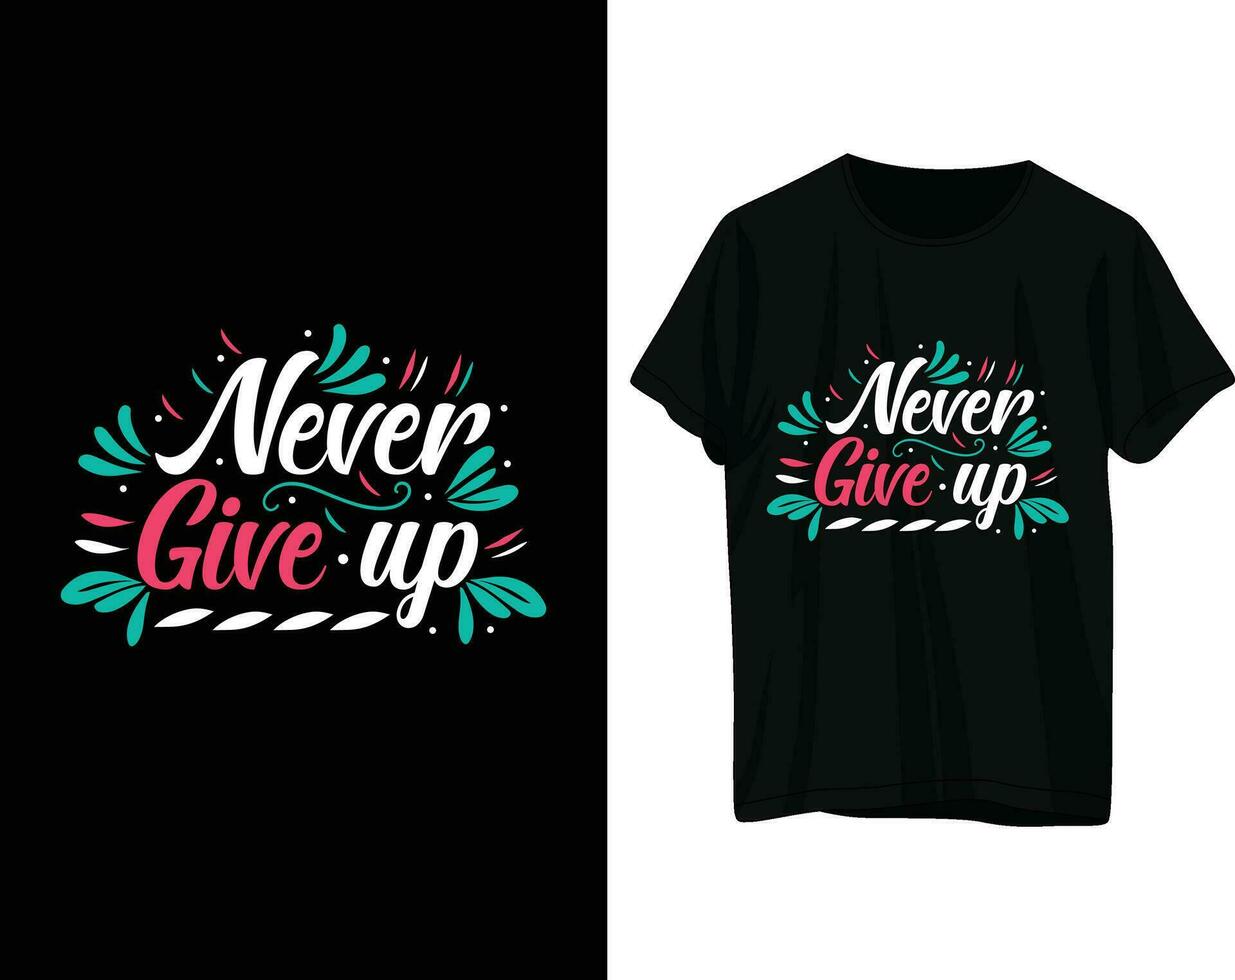 Never give up tshirt design vector